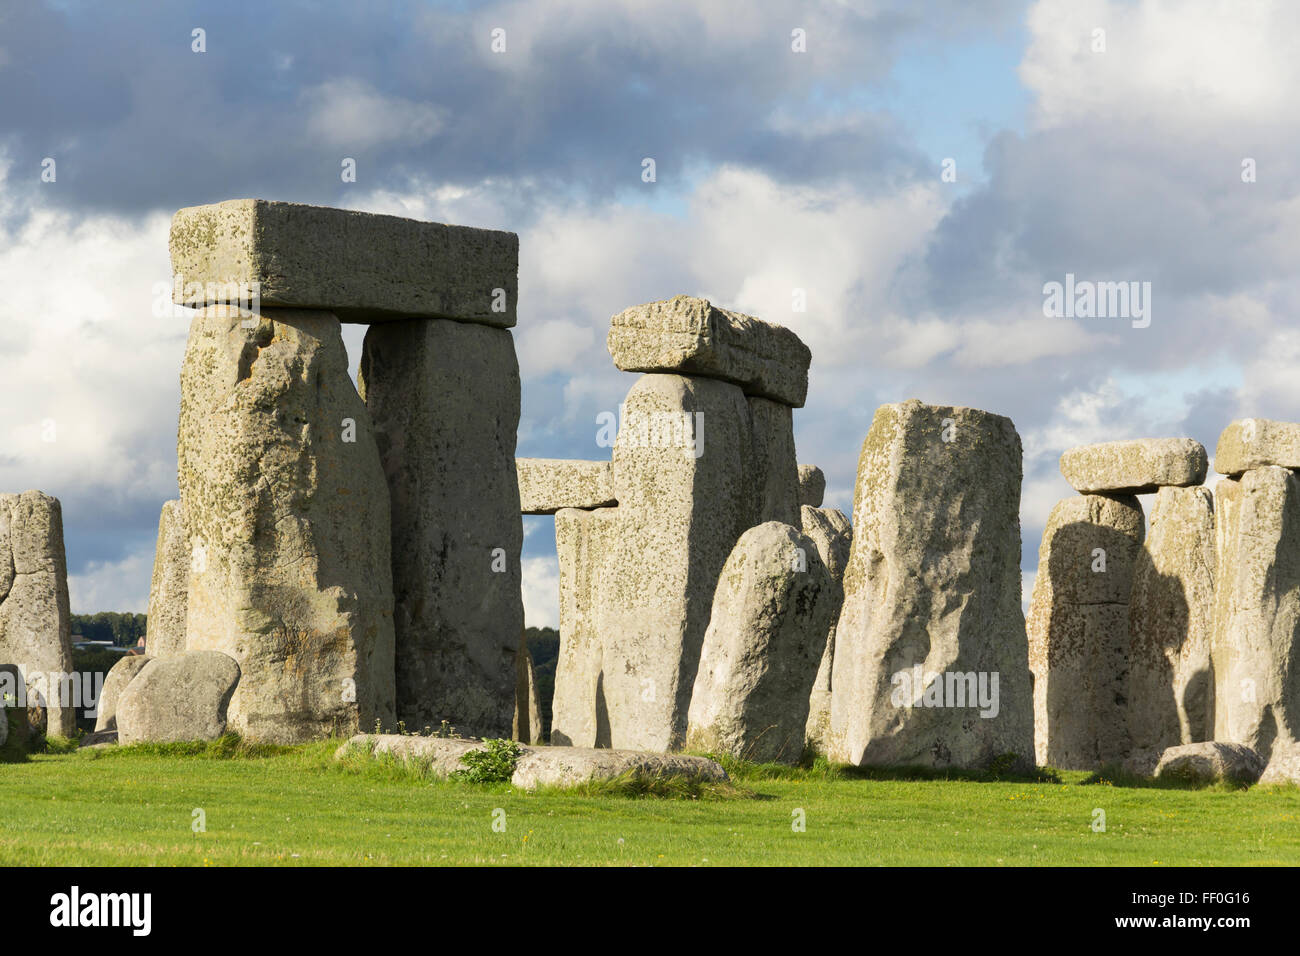 Part of the ancient ruins of Stonehenge, Wiltshire. Stock Photo